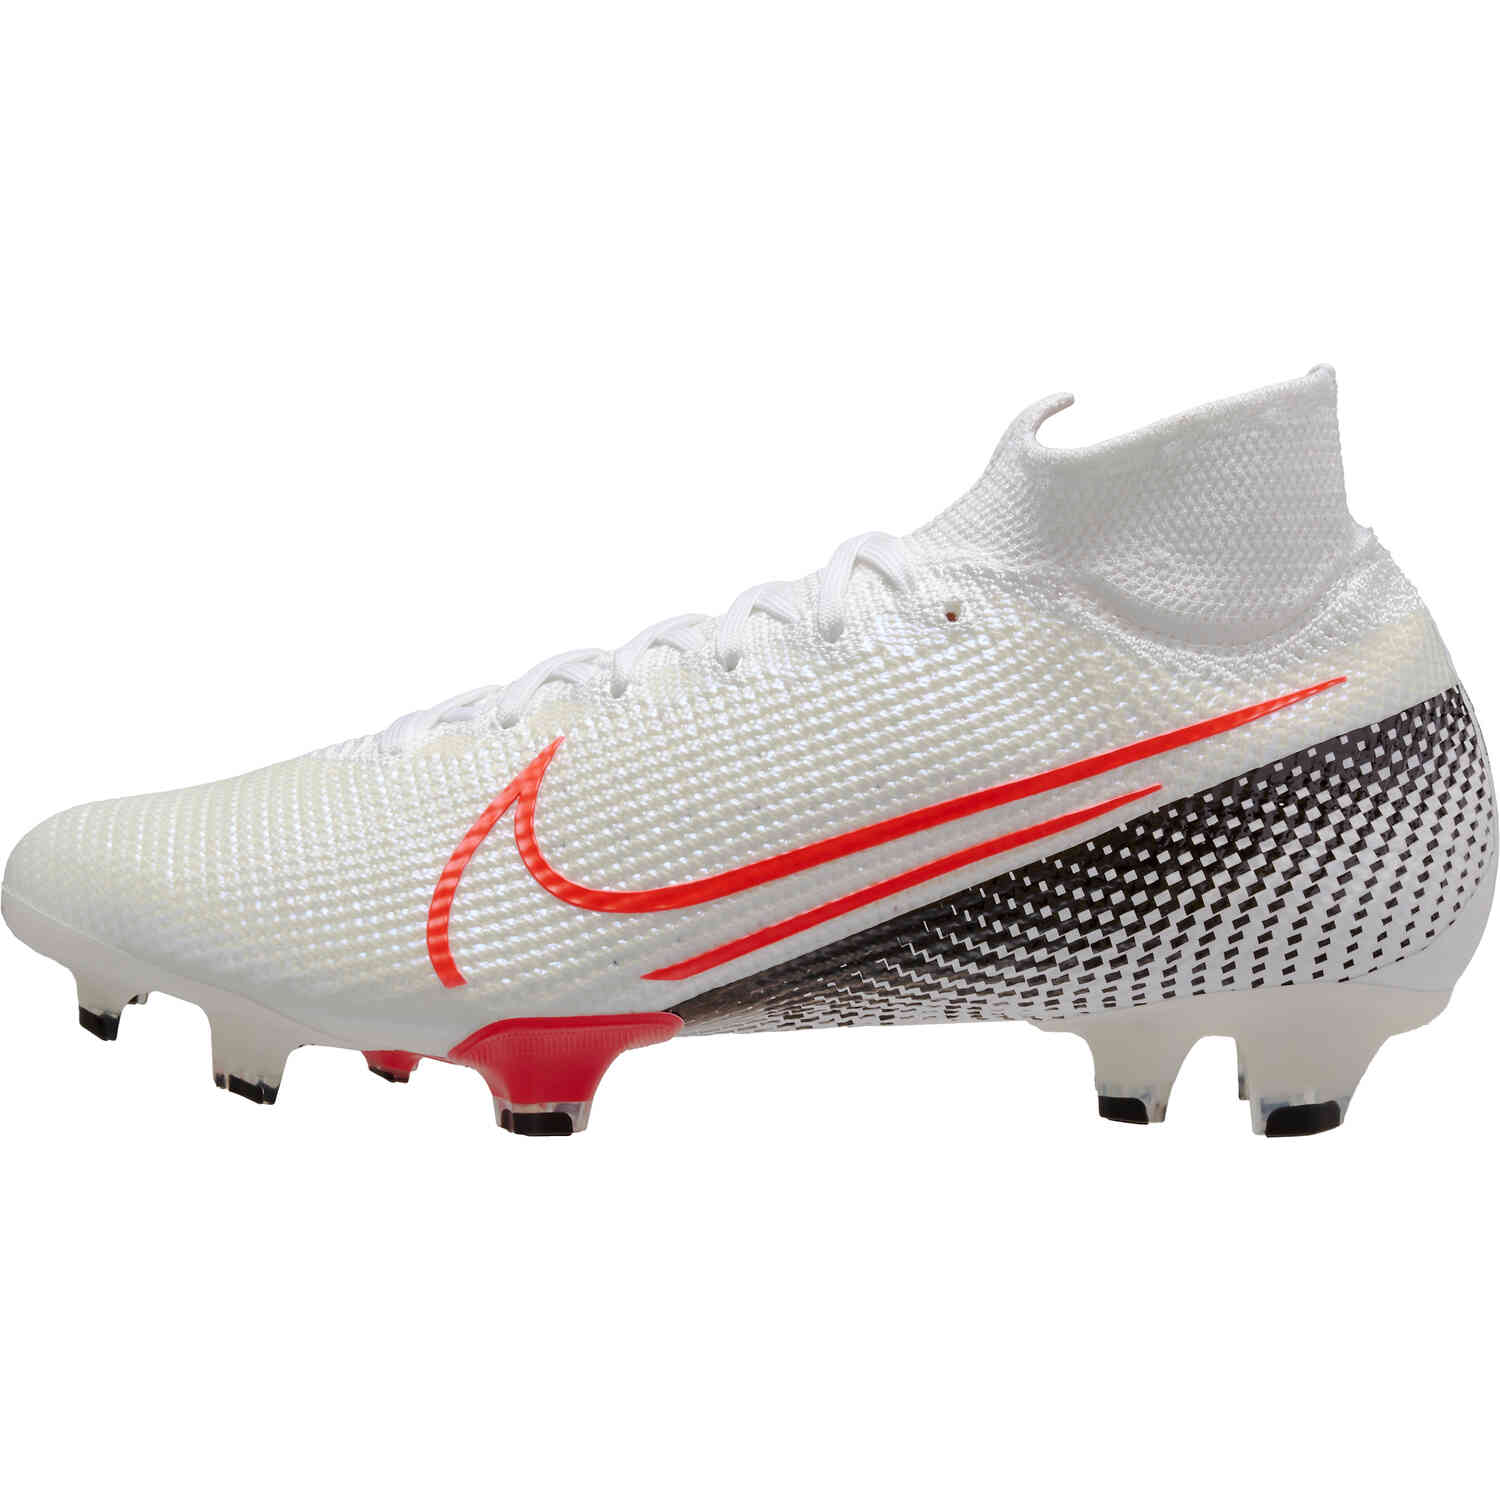 historisch abstract behuizing Nike Mercurial Superfly 7 Elite FG - Future Lab II - Soccer Master